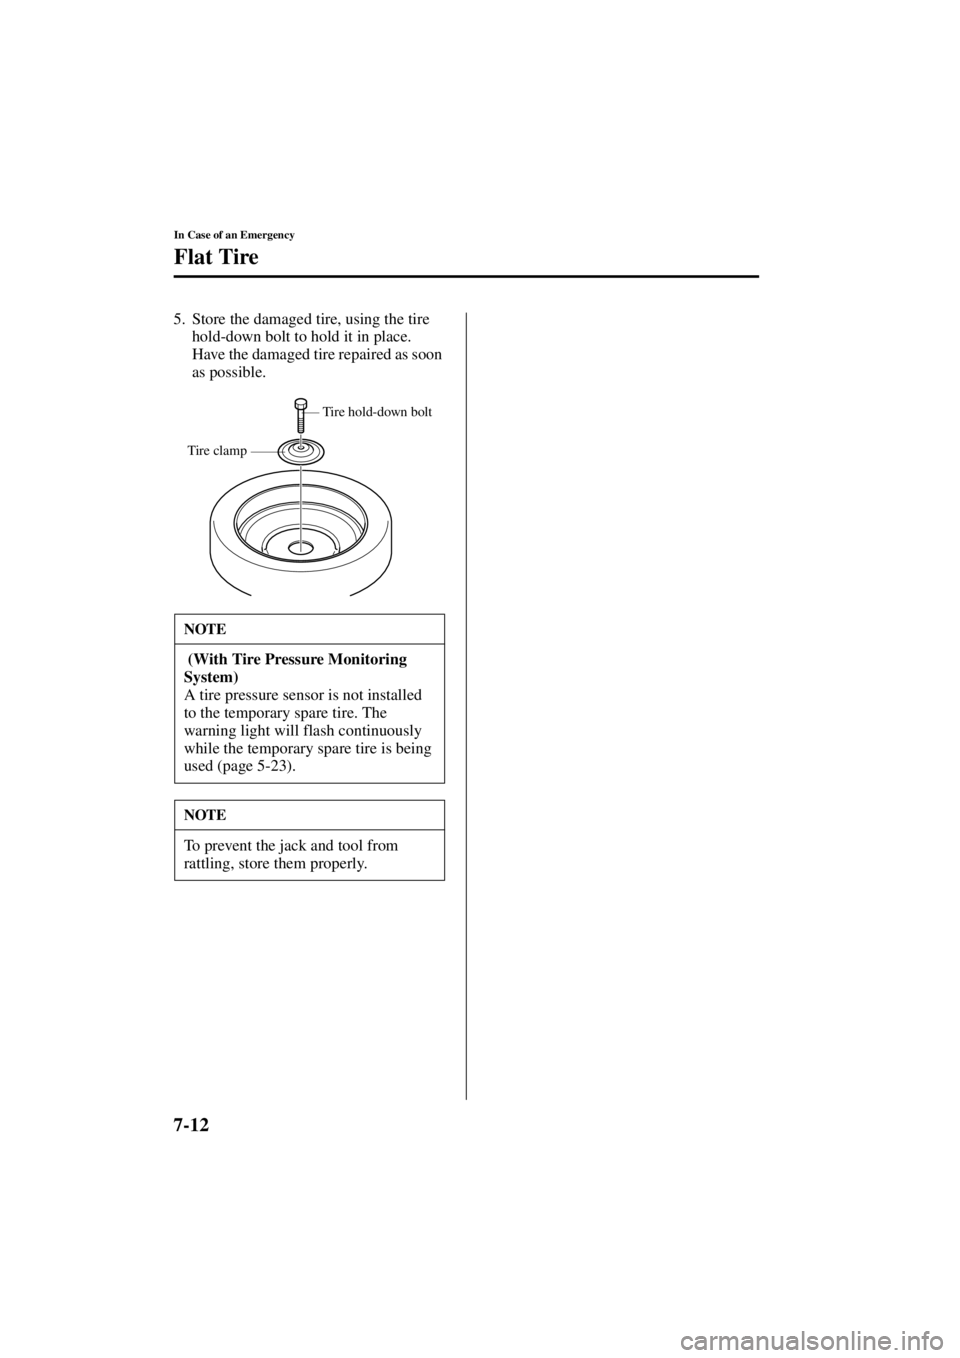 MAZDA MODEL 3 5-DOOR 2004  Owners Manual 7-12
In Case of an Emergency
Flat Tire
Form No. 8S18-EA-03I
5. Store the damaged tire, using the tire hold-down bolt to hold it in place. 
Have the damaged tire repaired as soon 
as possible.
NOTE
 (W